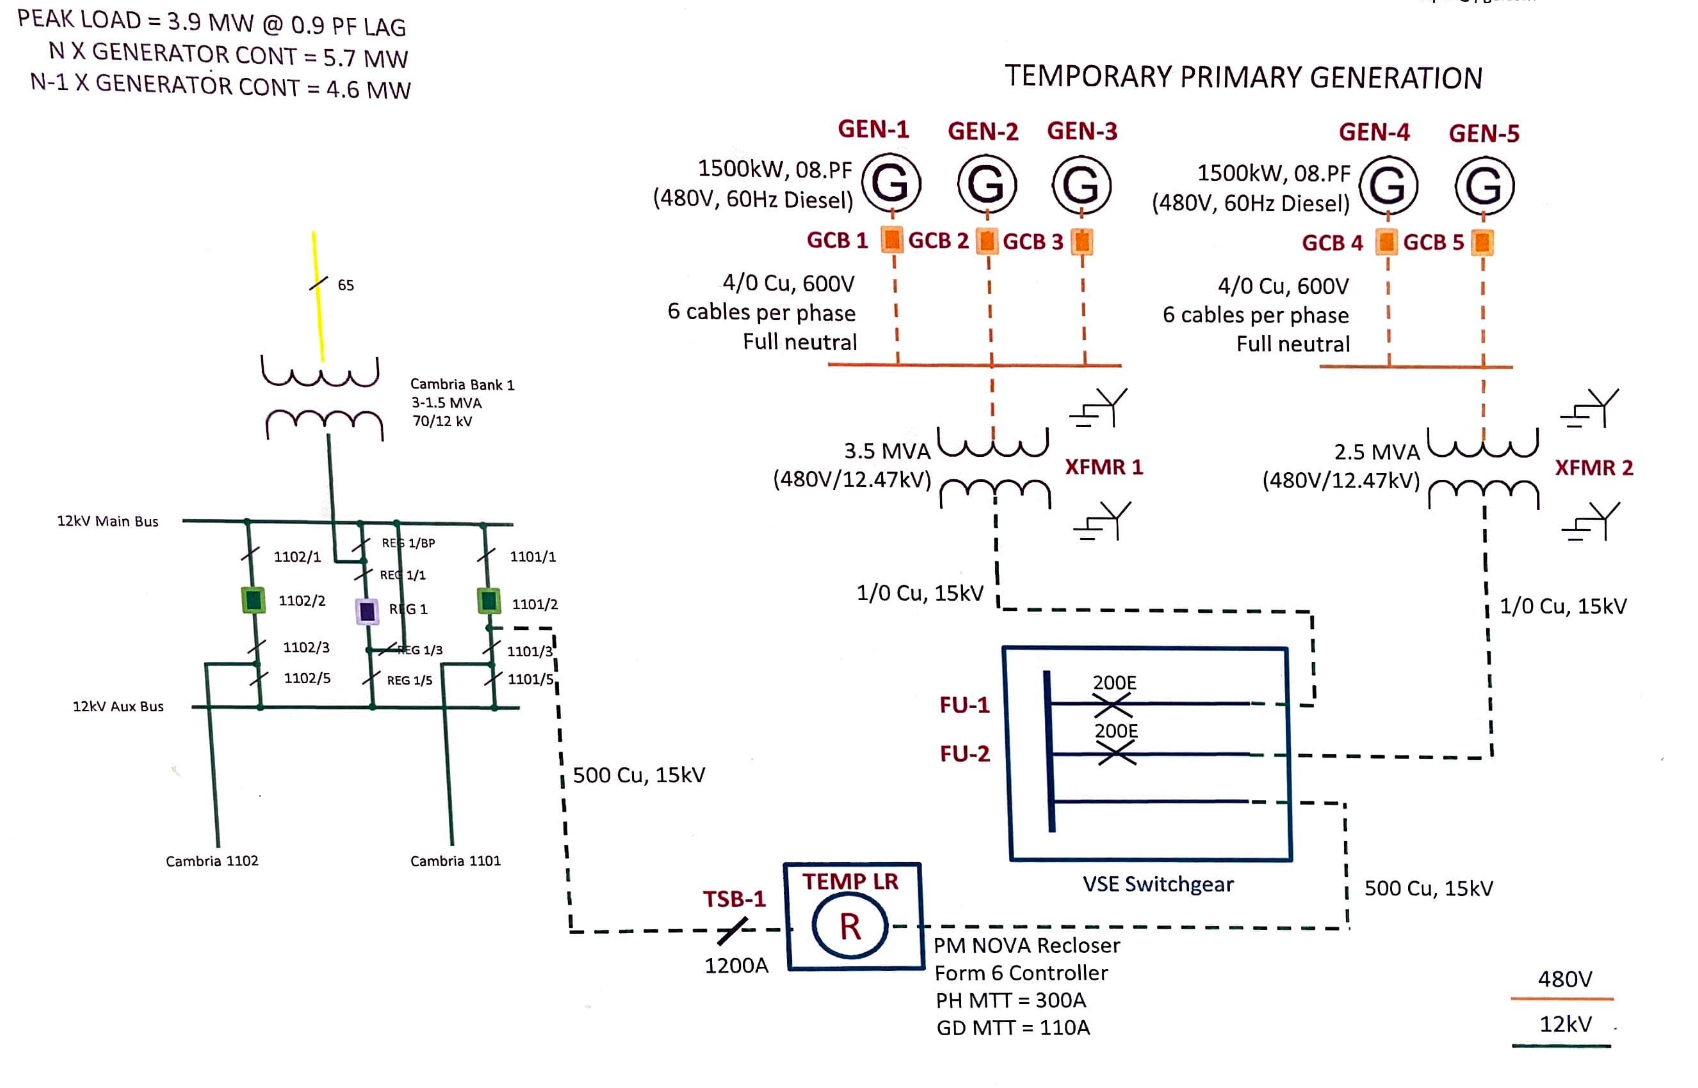 Temporary Microgrid Design and Test Procedures